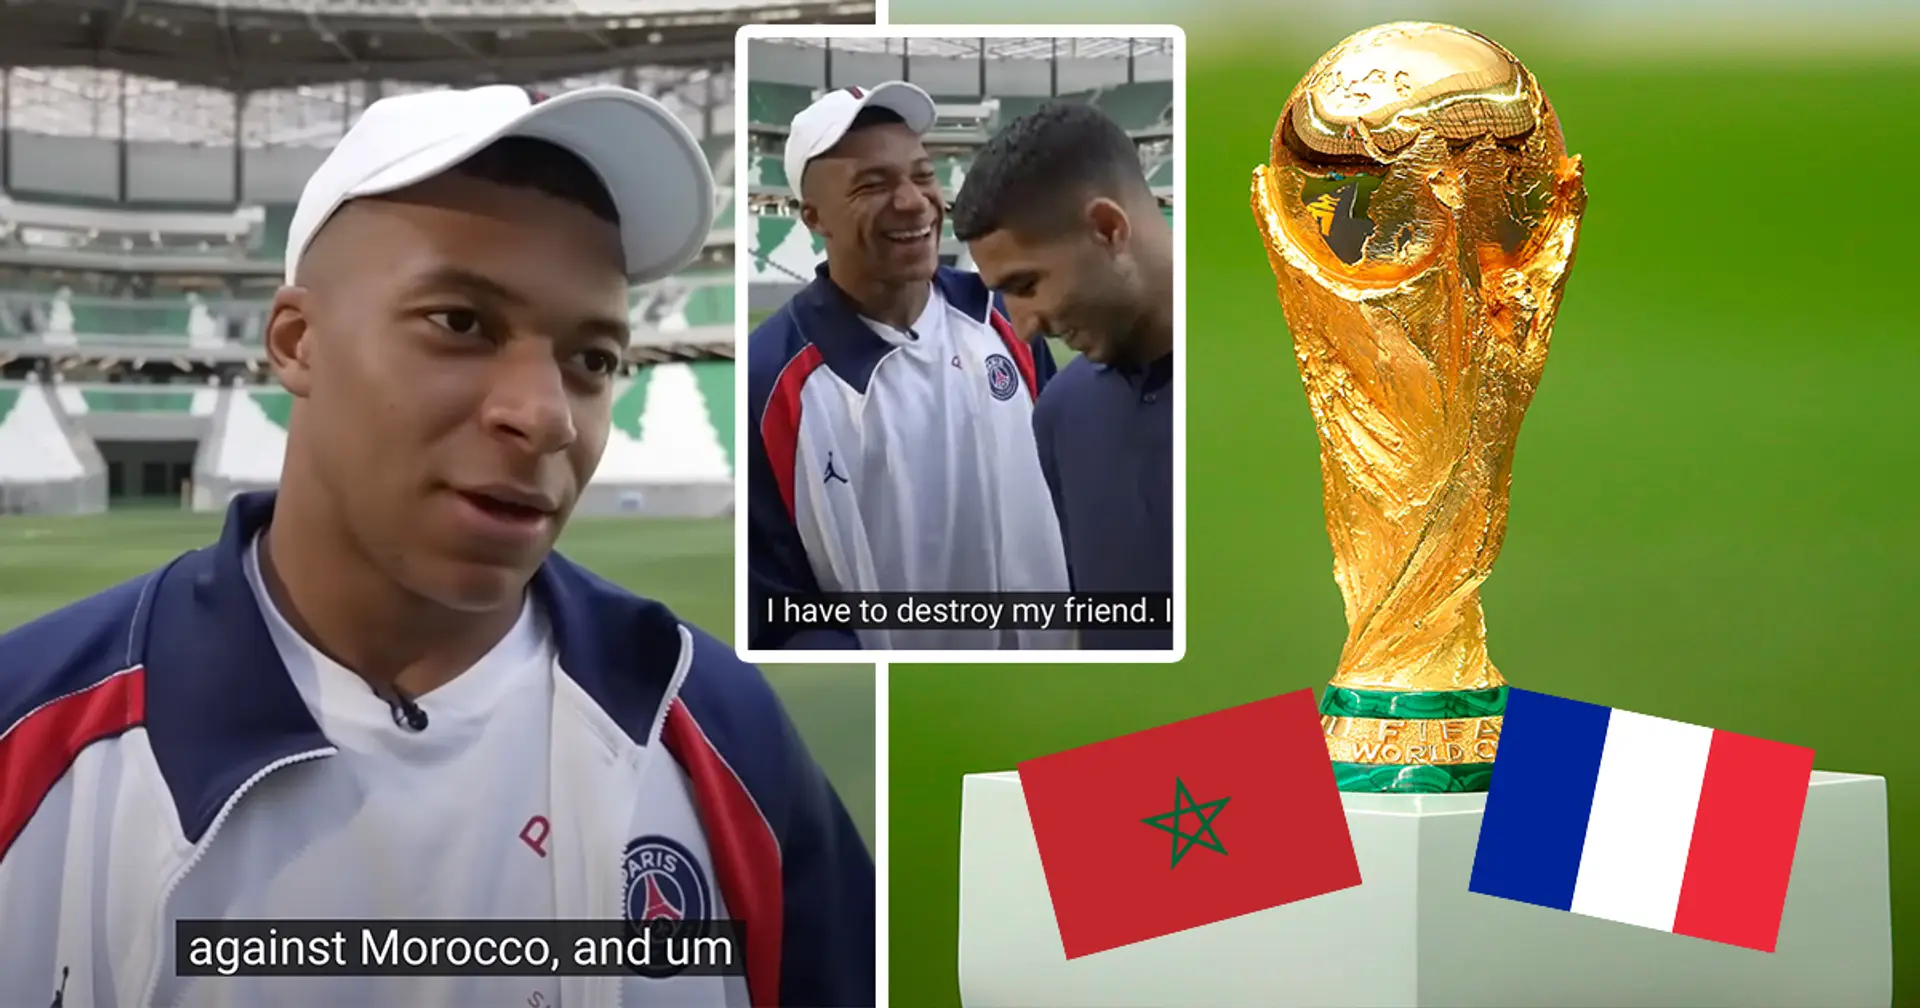 'I have to destroy my friend': One year ago, Kylian Mbappe predicted France facing Morocco at the World Cup